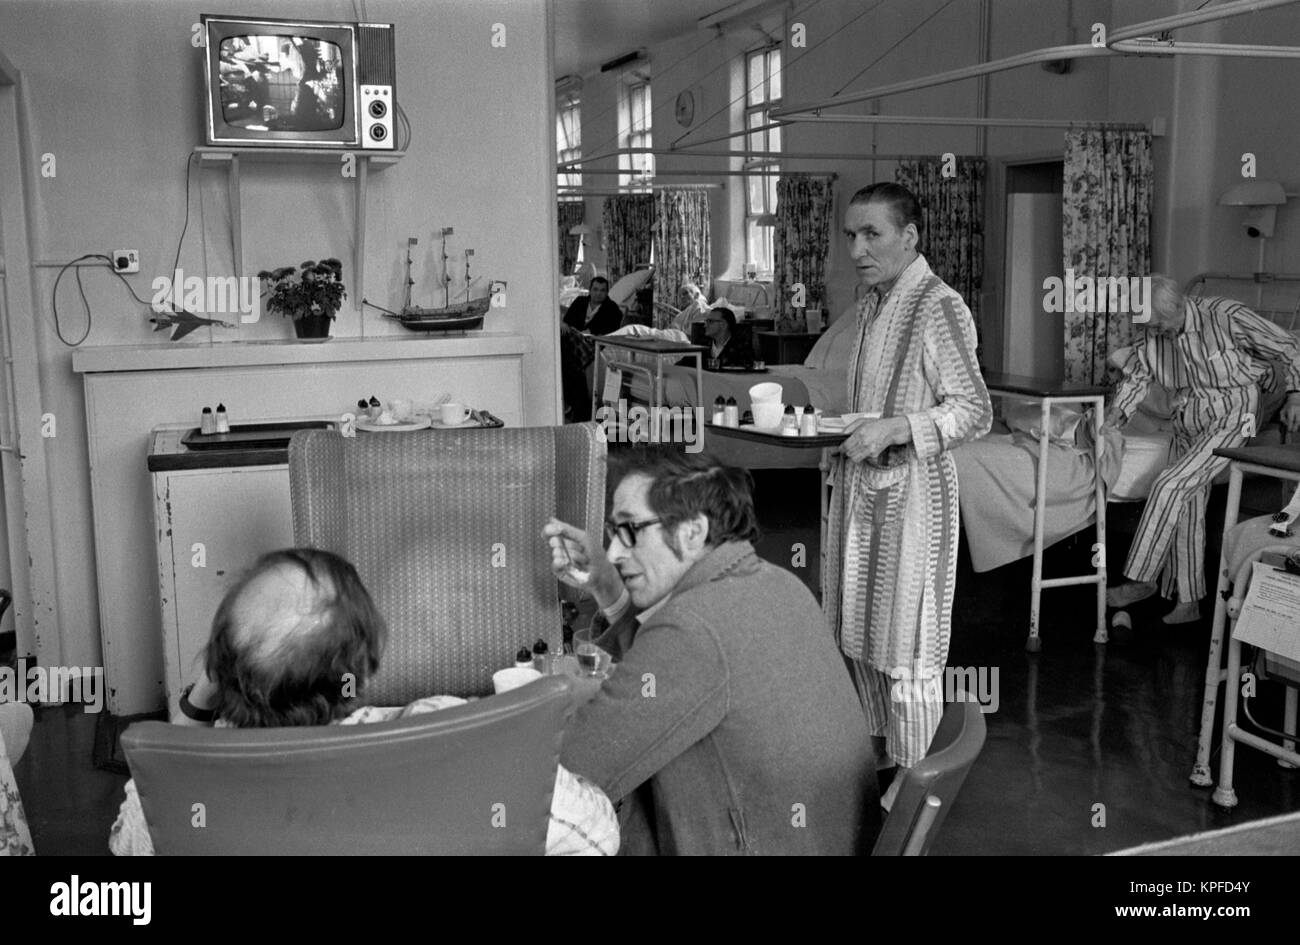 The 1970s National Health Service (NHS) lunch time at Charing Cross Hospital. Patients are allowed to wander around within the ward, eat their meals and watch television. Fulham, London, England circa 1972. UK HOMER SYKES Stock Photo